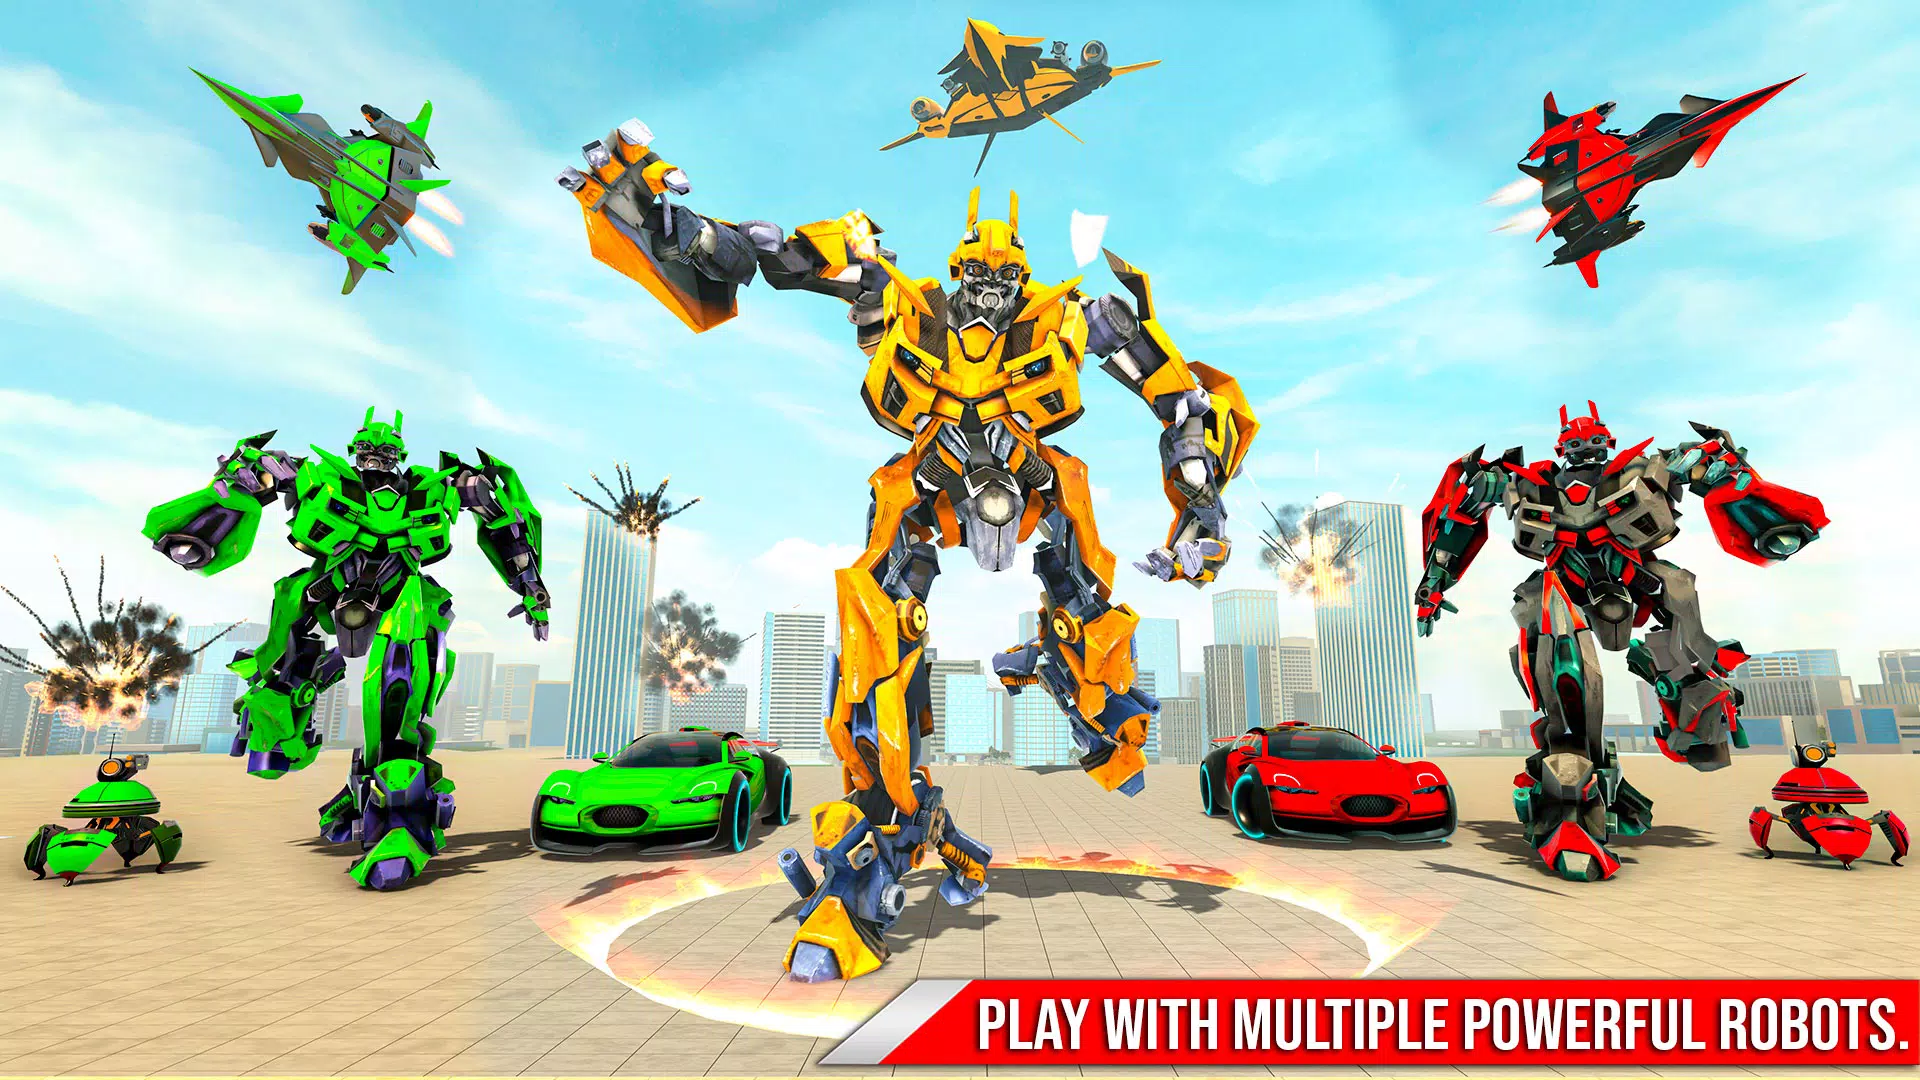 Gioco del robot aereo for Android - APK Download